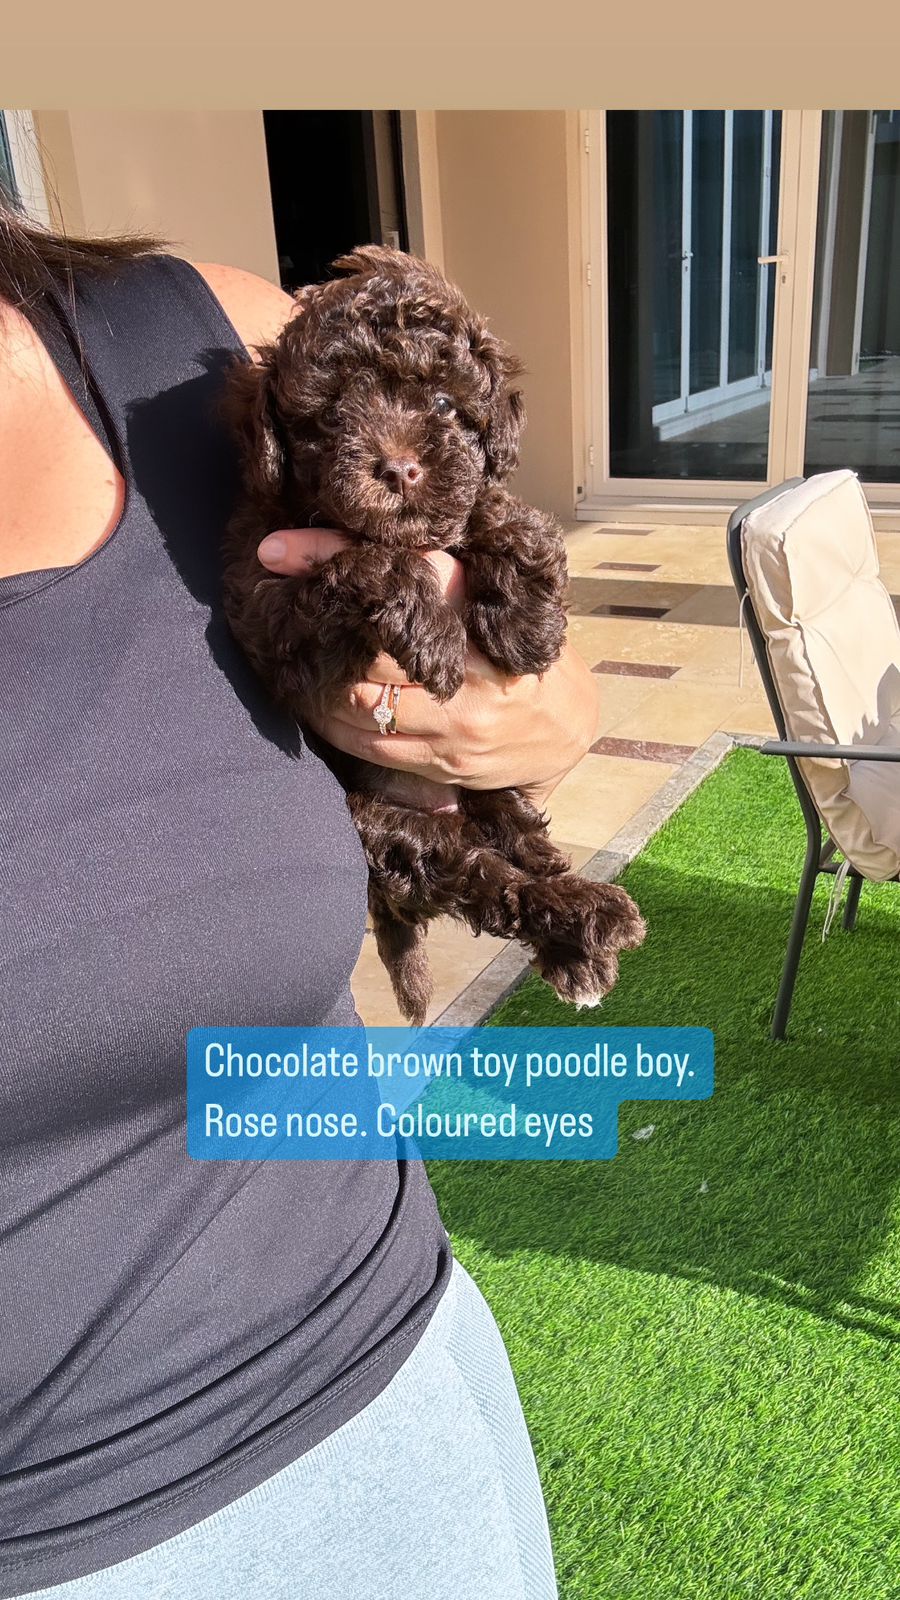 Chocolate brown toy poodle boy. Rose nose. Colored eyes